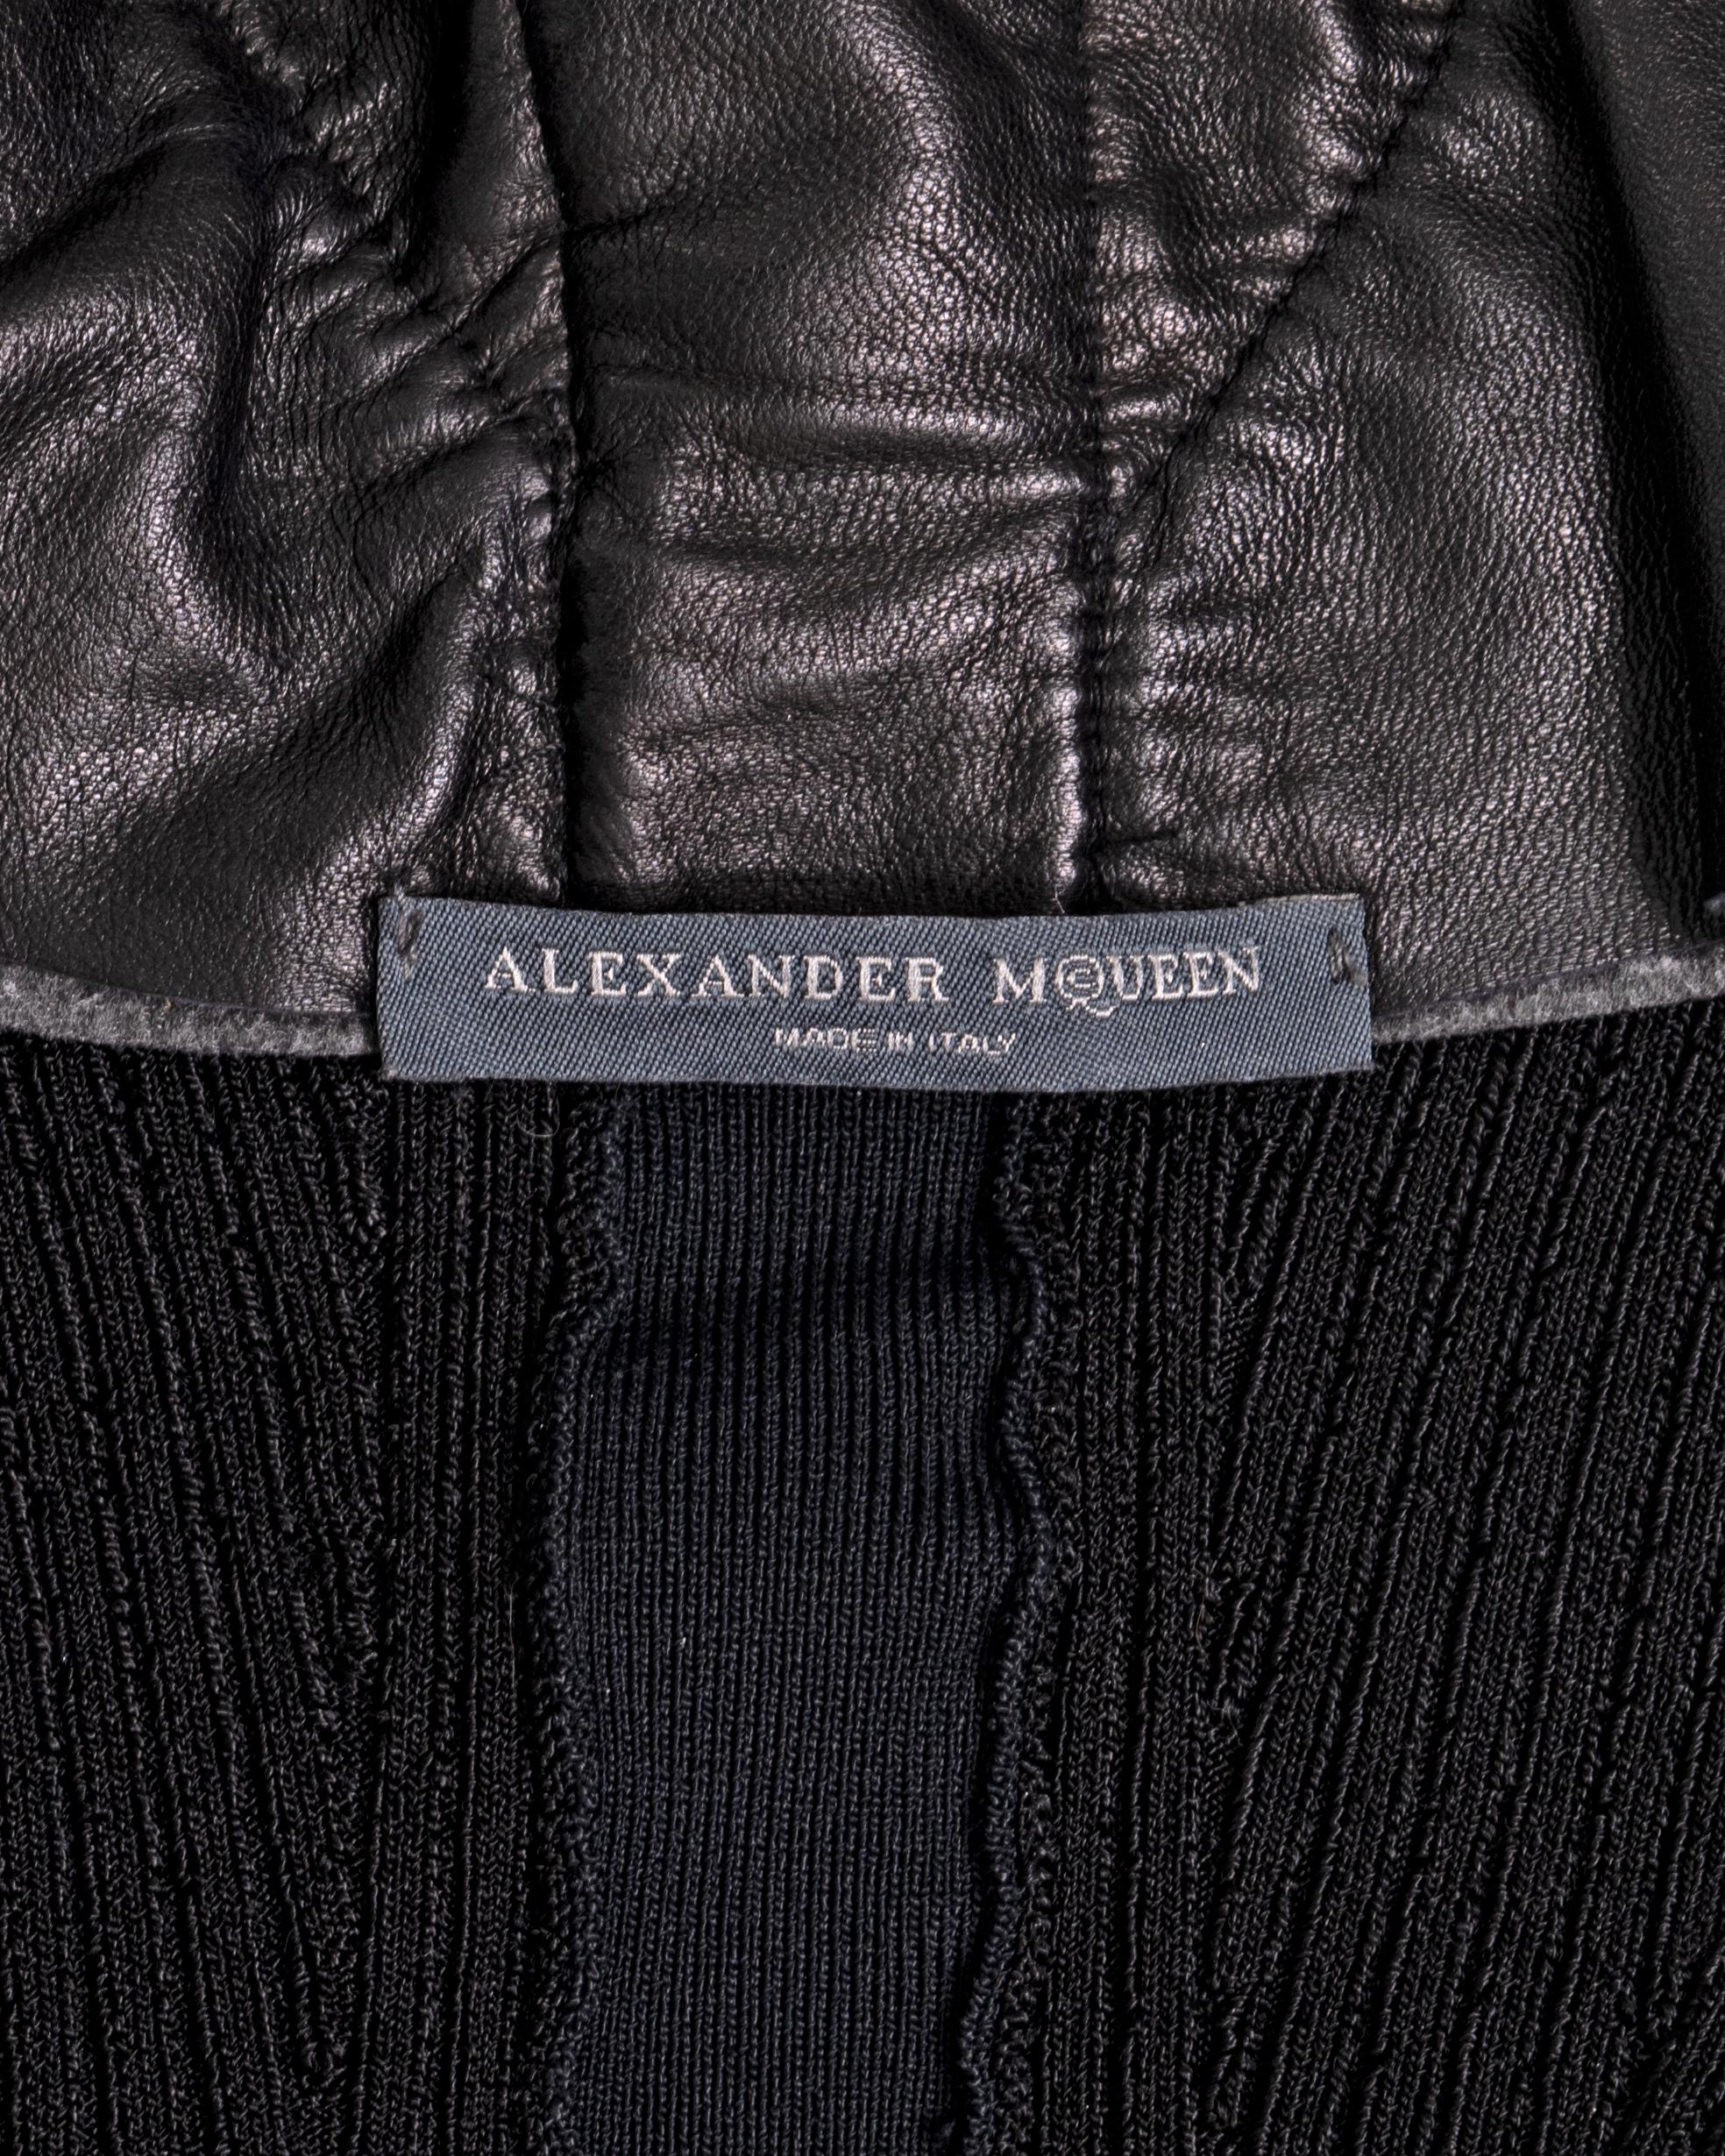 Alexander McQueen black rib knit mini dress with leather bustier, ss 2004 For Sale 8